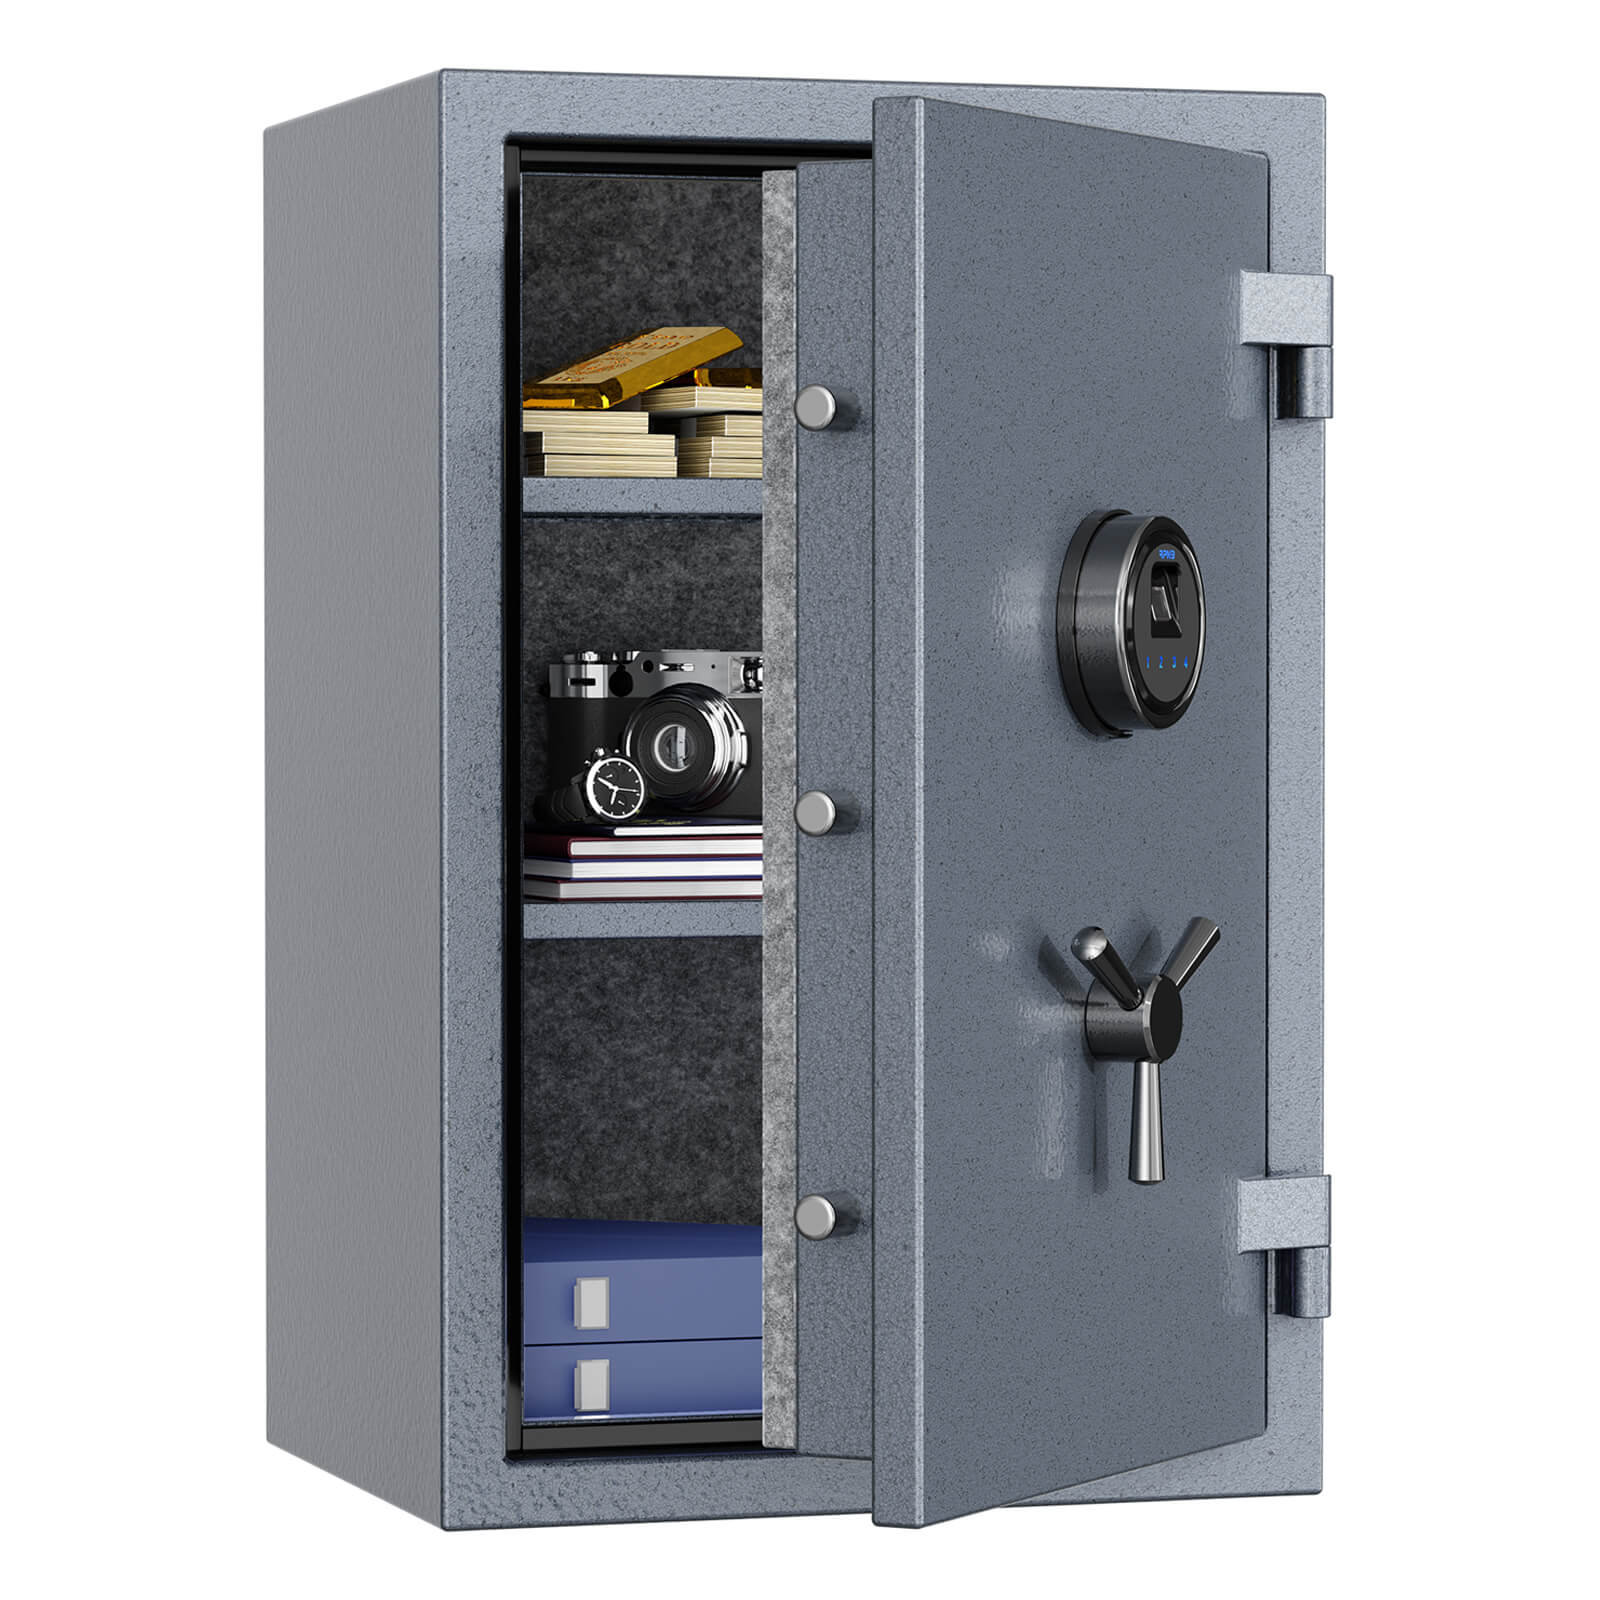 RPNB RPFS66G Grey Large Biometric Fireproof Safe with Touch Screen Keypad